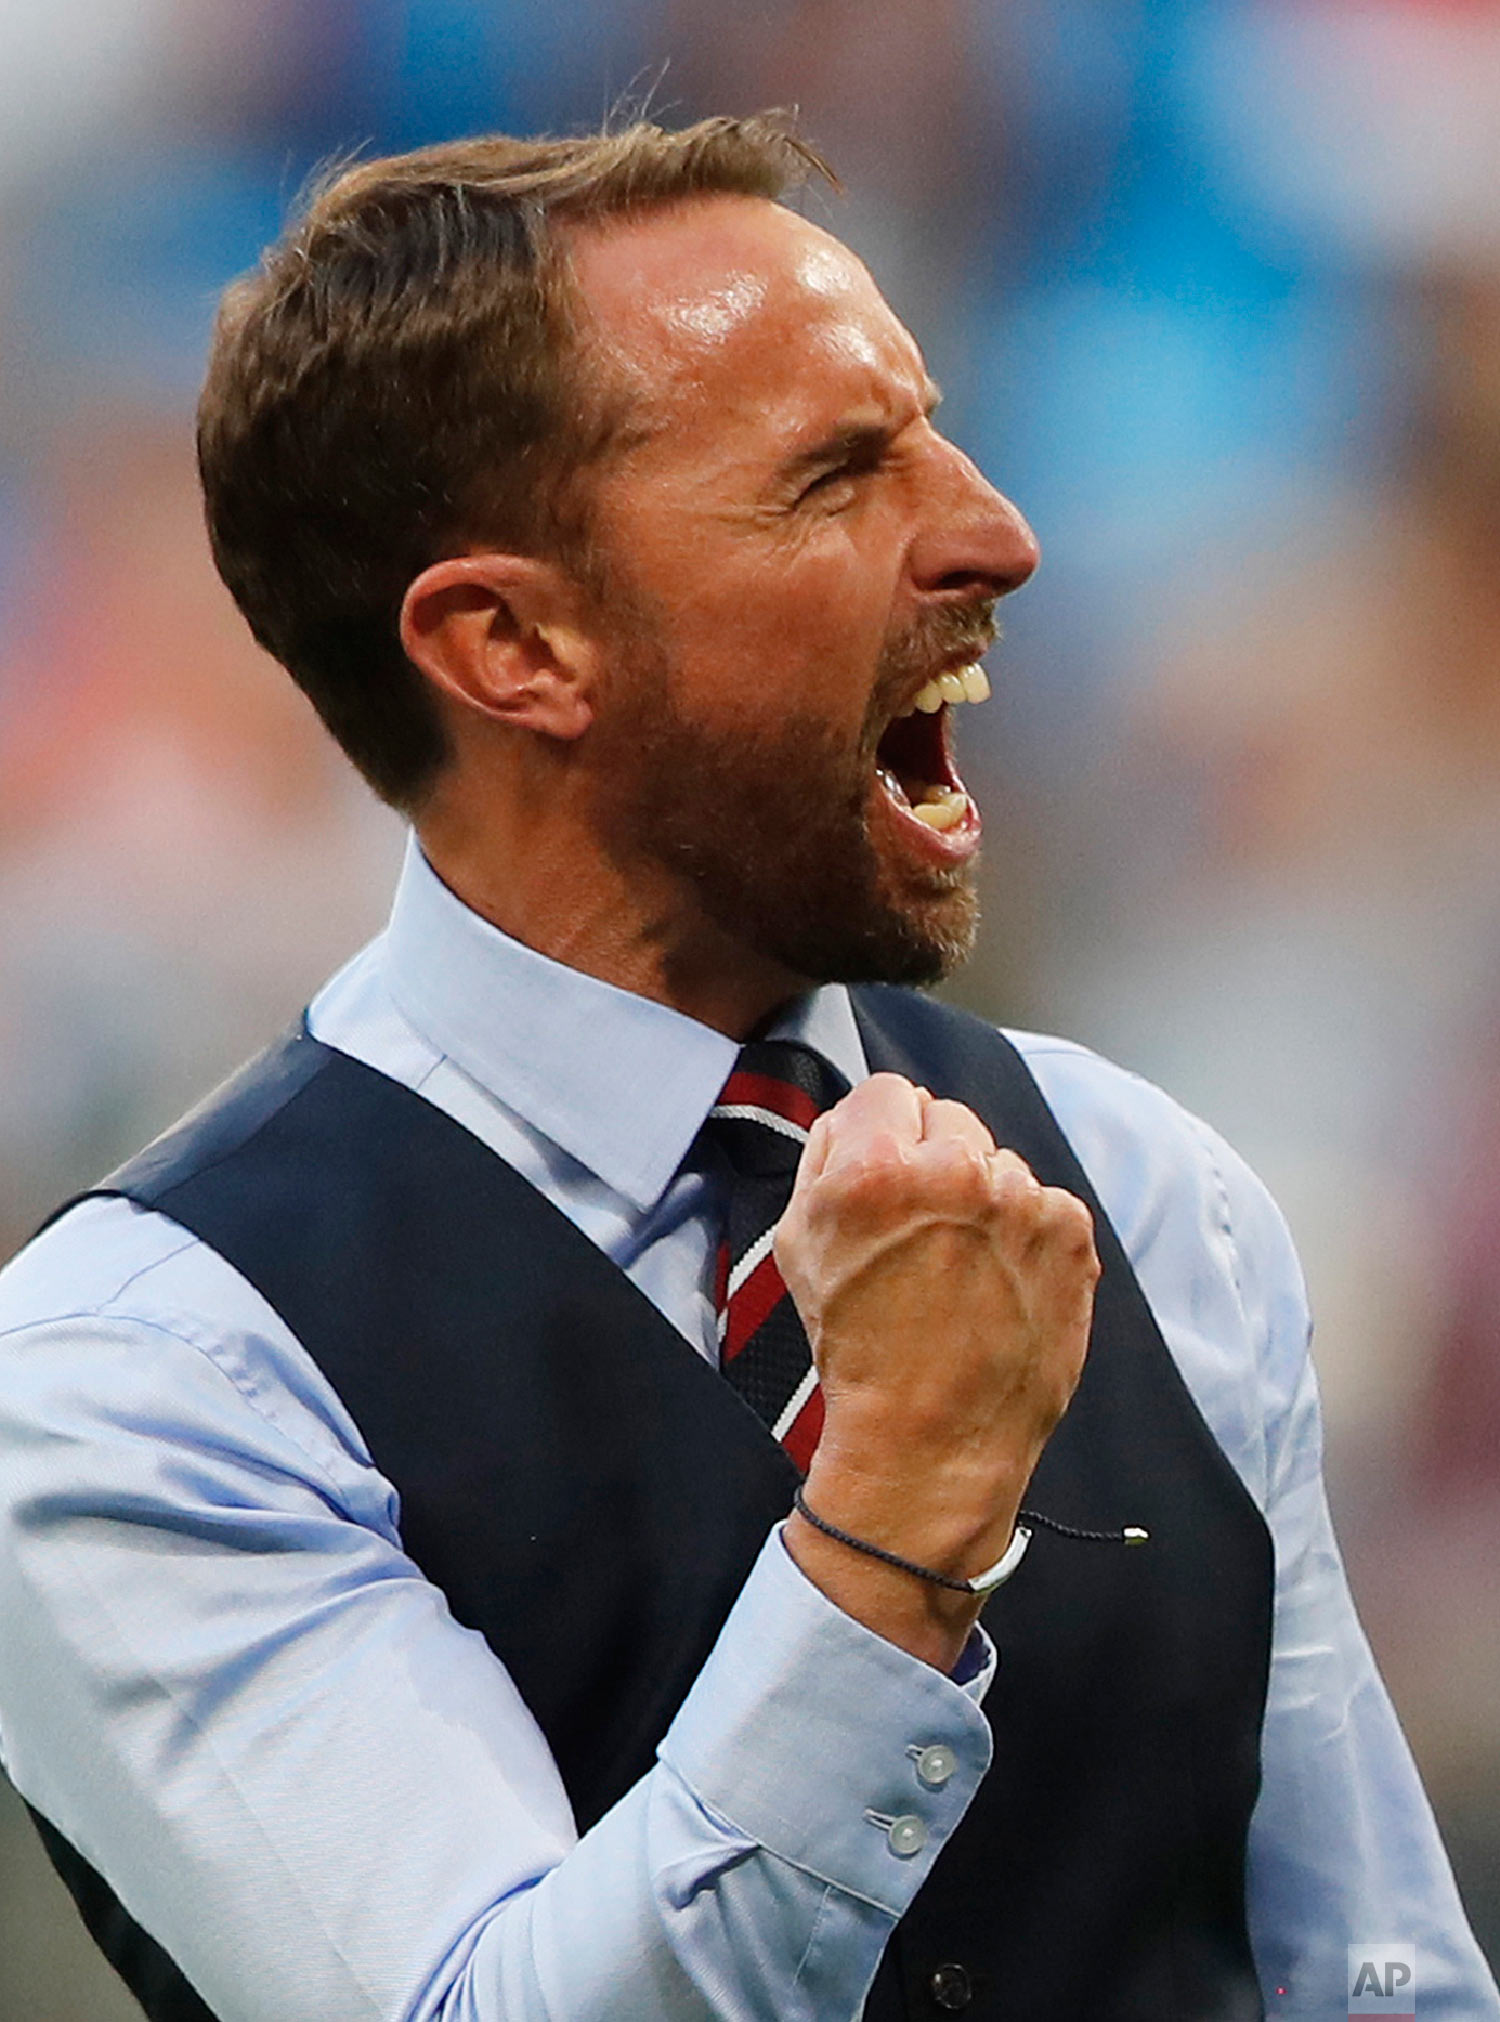  England head coach Gareth Southgate celebrates victory of his team over Sweden during the quarterfinal match between Sweden and England at the 2018 soccer World Cup in the Samara Arena, in Samara, Russia, Saturday, July 7, 2018. (AP Photo/Frank Augs